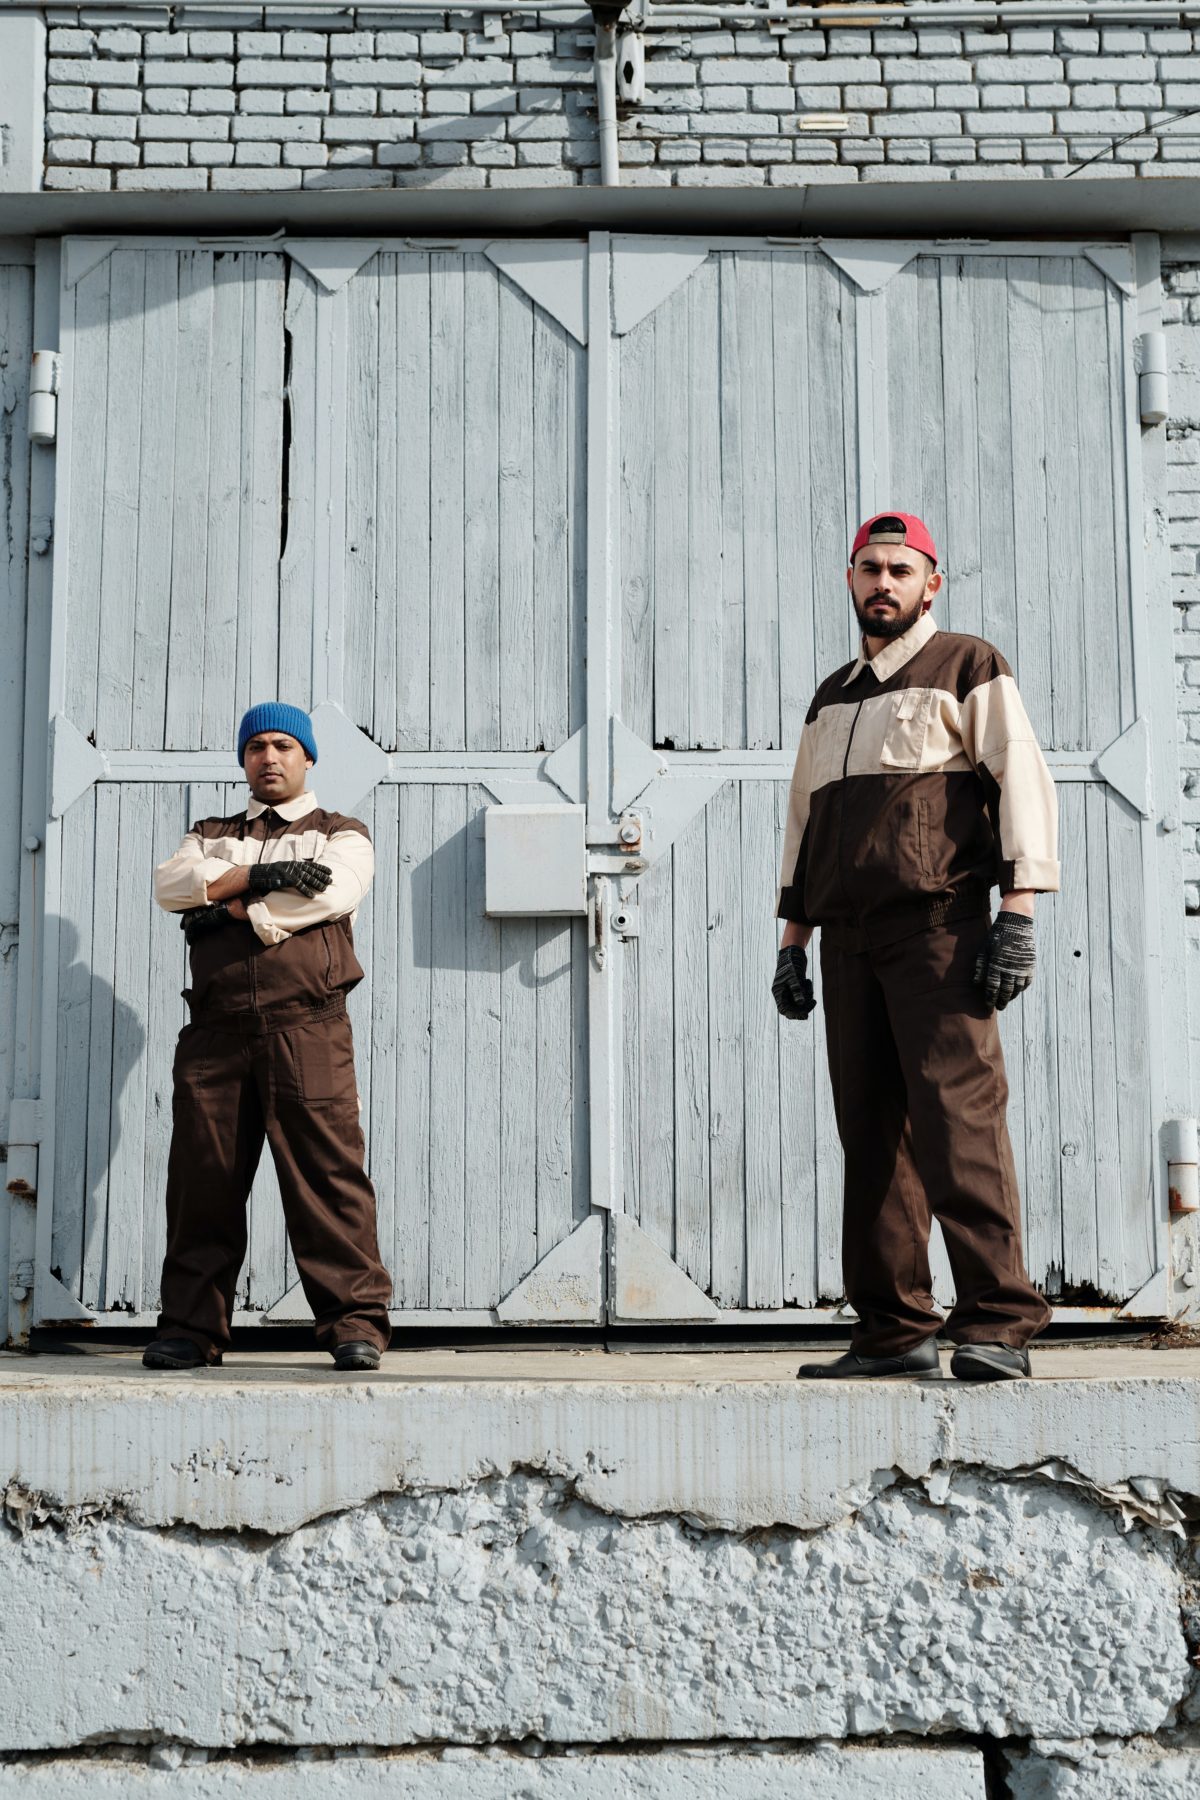 A large man and a small man standing in front of an industrial door.